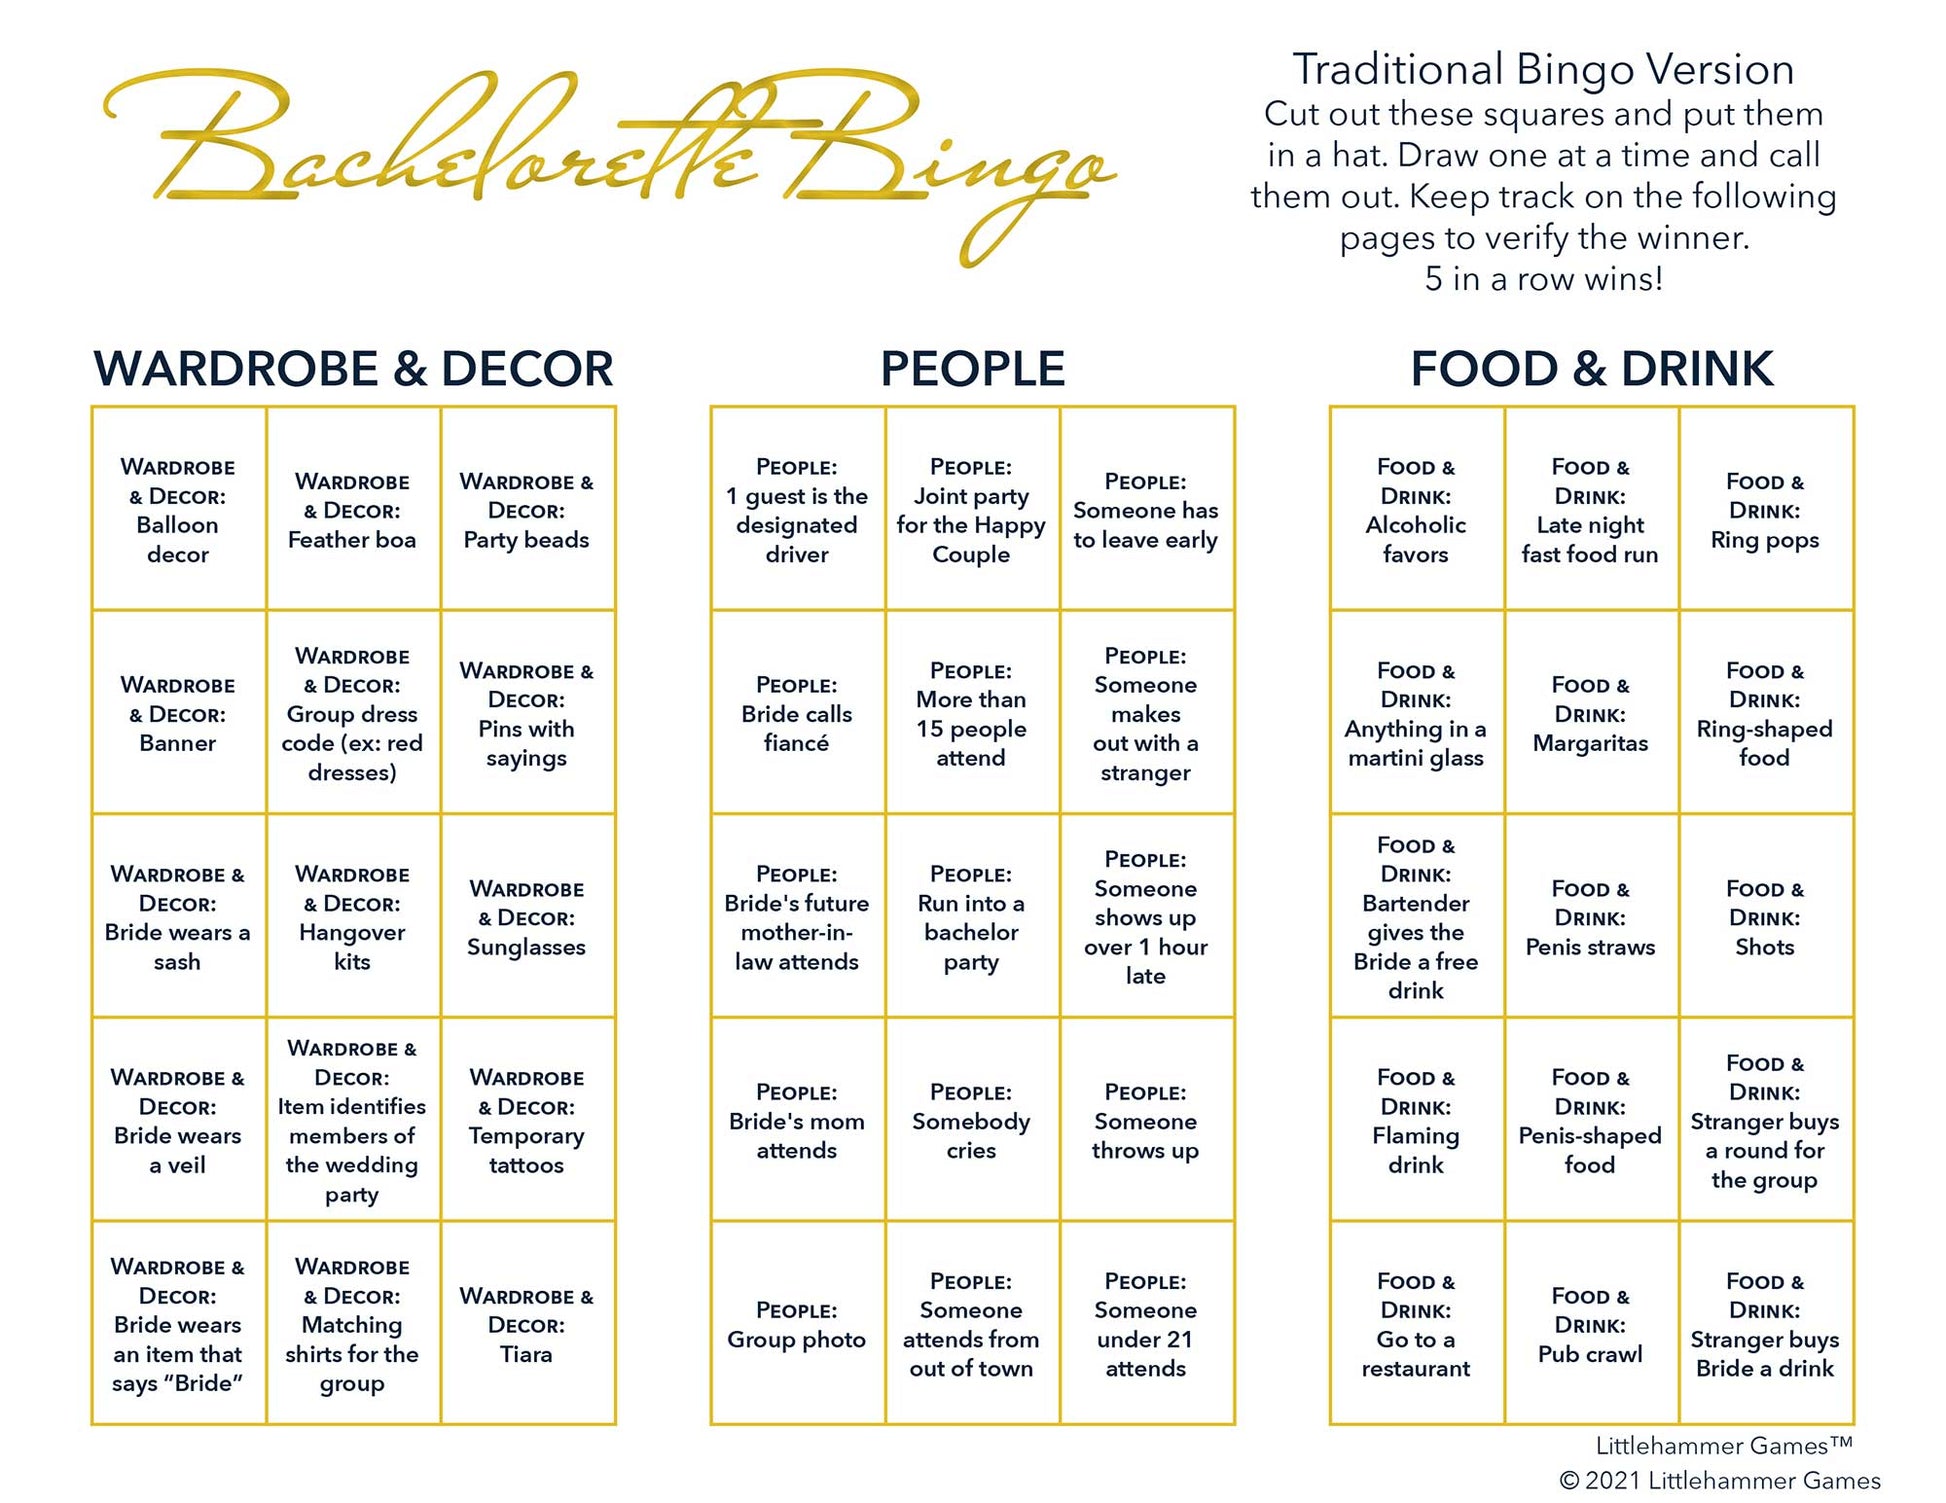 Bachelorette Bingo calling card with gold text on a white background